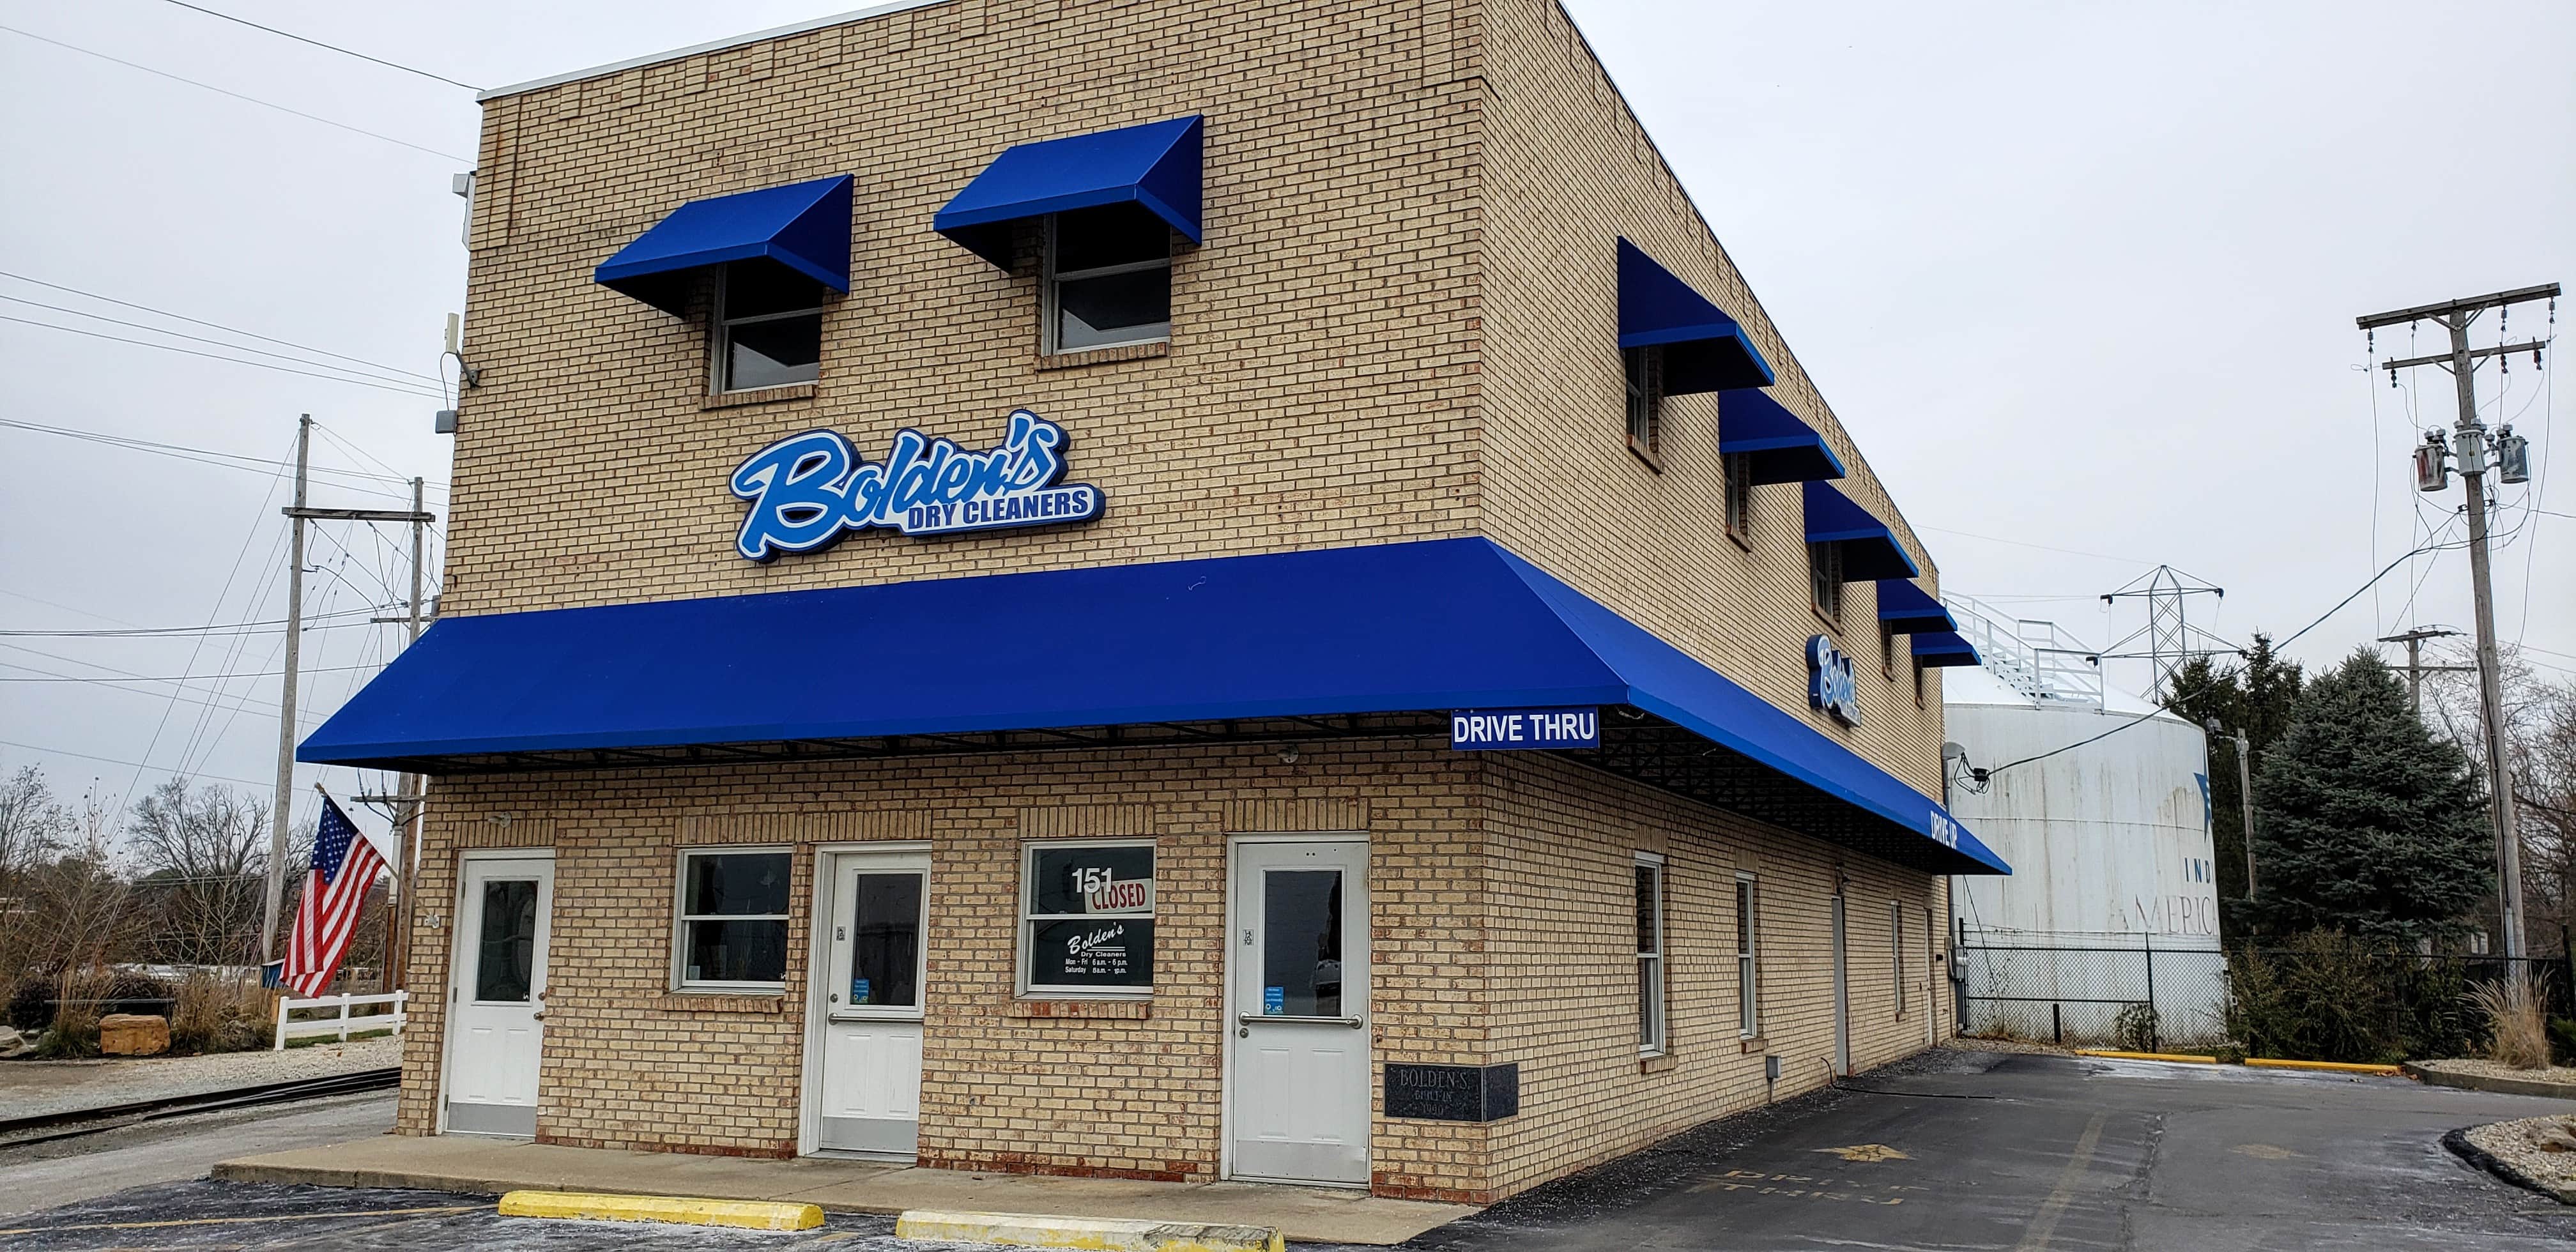 Bolden's Dry Cleaners - Noblesville, IN, US, dry cleaner